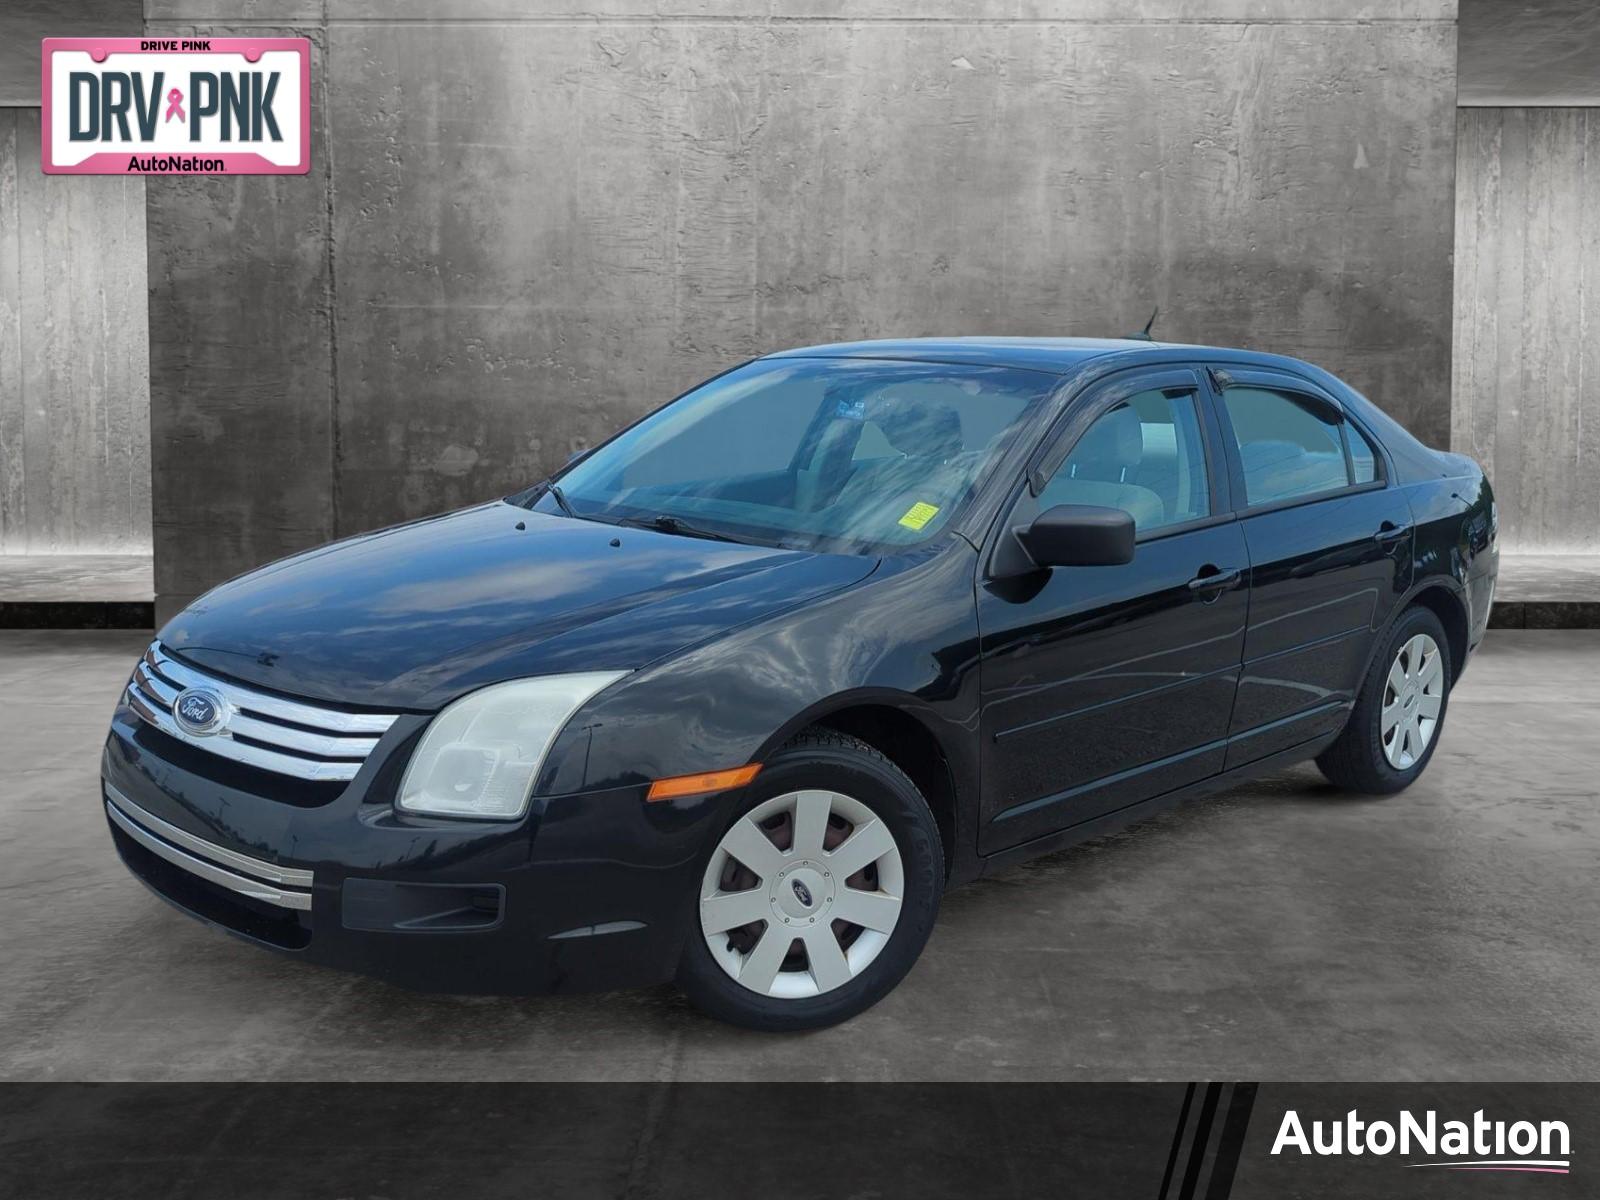 2008 Ford Fusion Vehicle Photo in Memphis, TN 38125